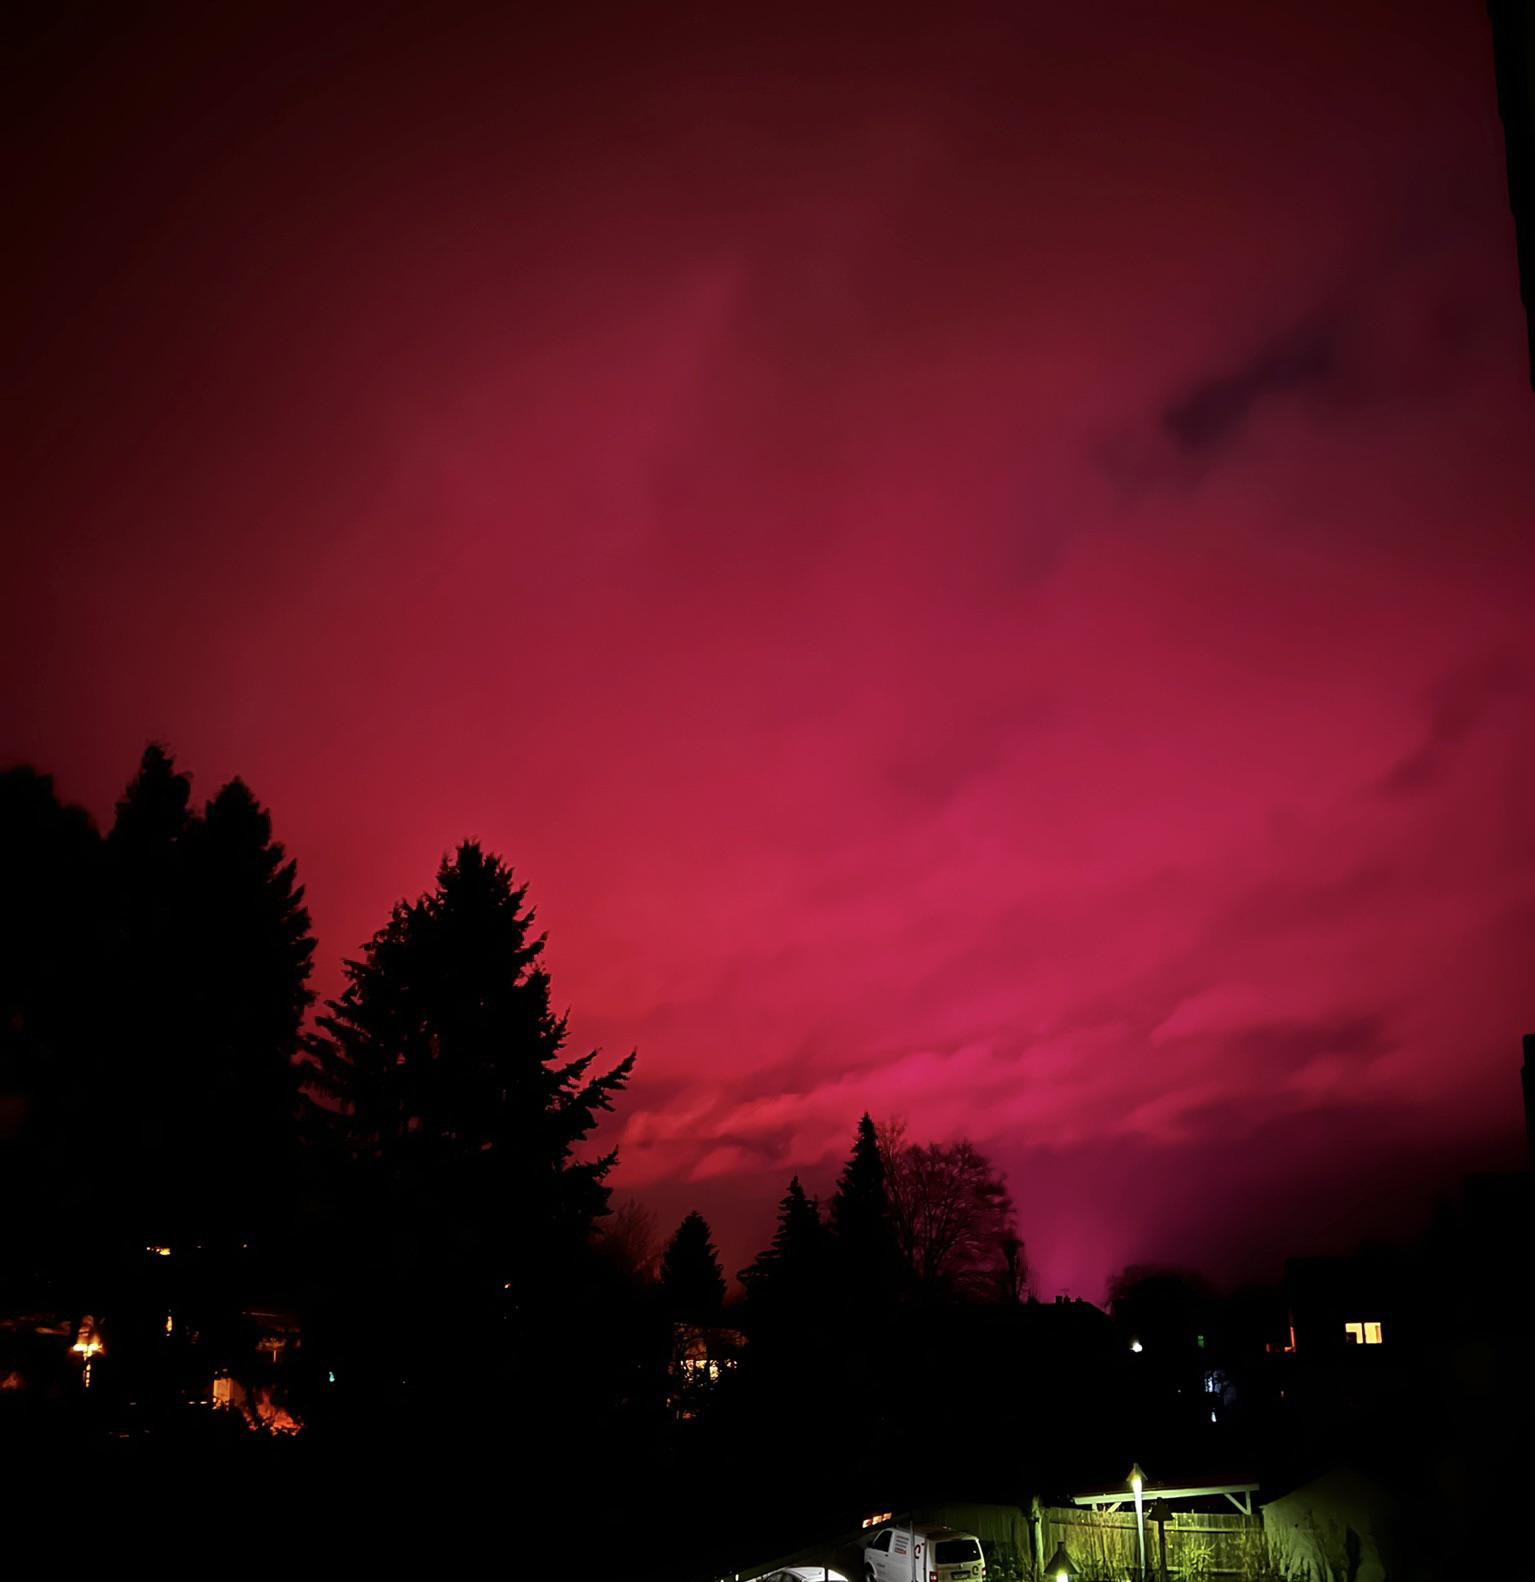 https://strangesounds.org/wp-content/uploads/2023/01/mysterious-red-sky-Bavaria-Germany.jpg